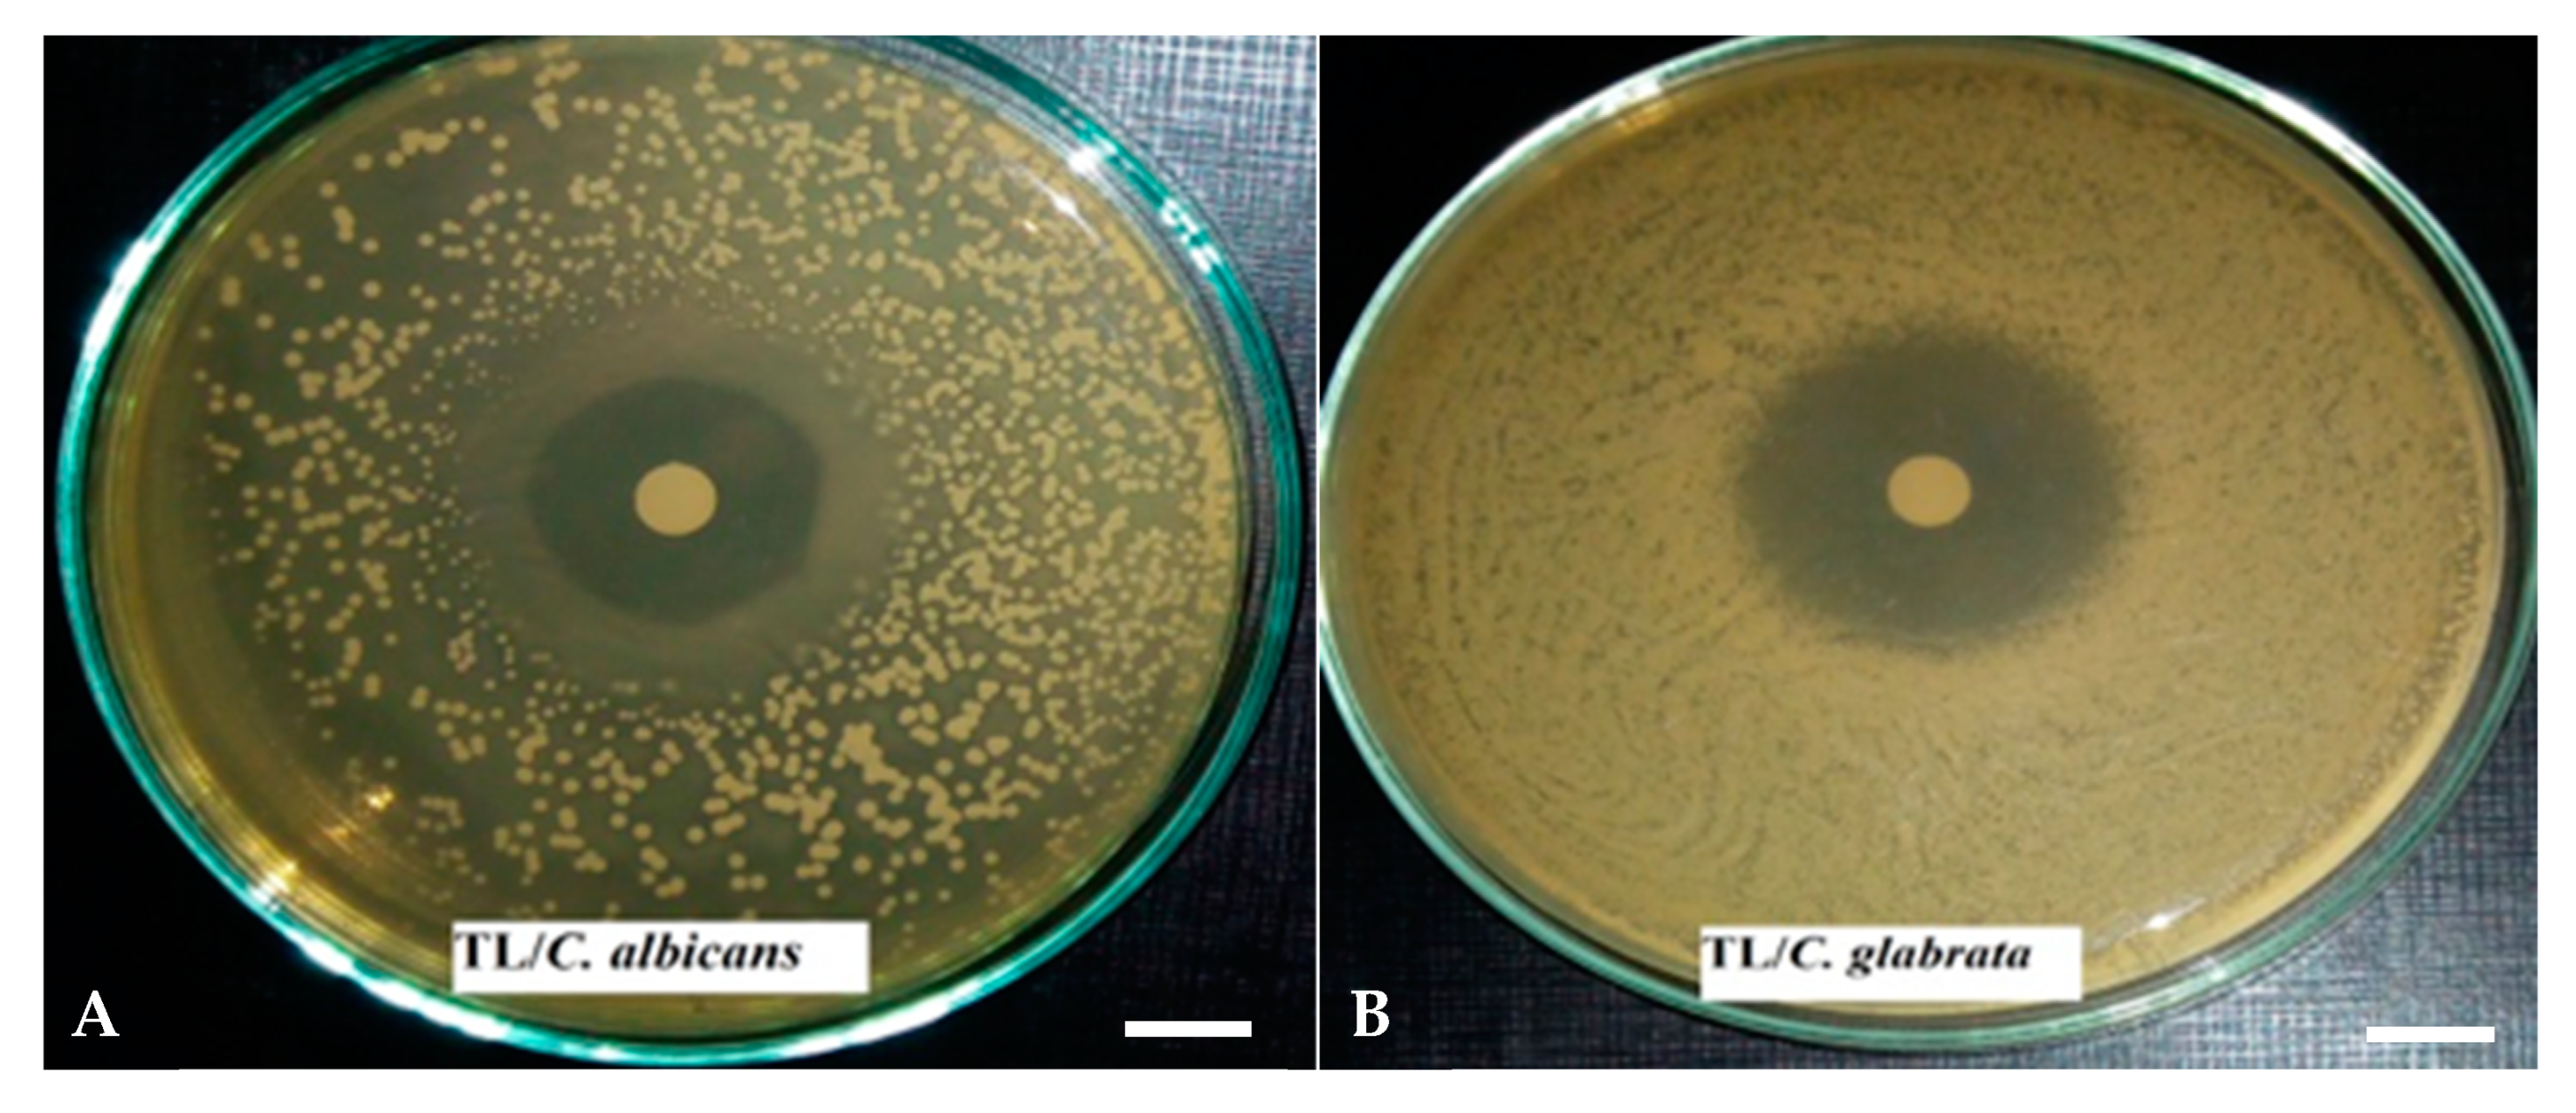 Pharmaceutics | Free Full-Text | Chemical Composition and Antimicrobial  Activity of Essential Oils from Three Mediterranean Plants against Eighteen  Pathogenic Bacteria and Fungi | HTML